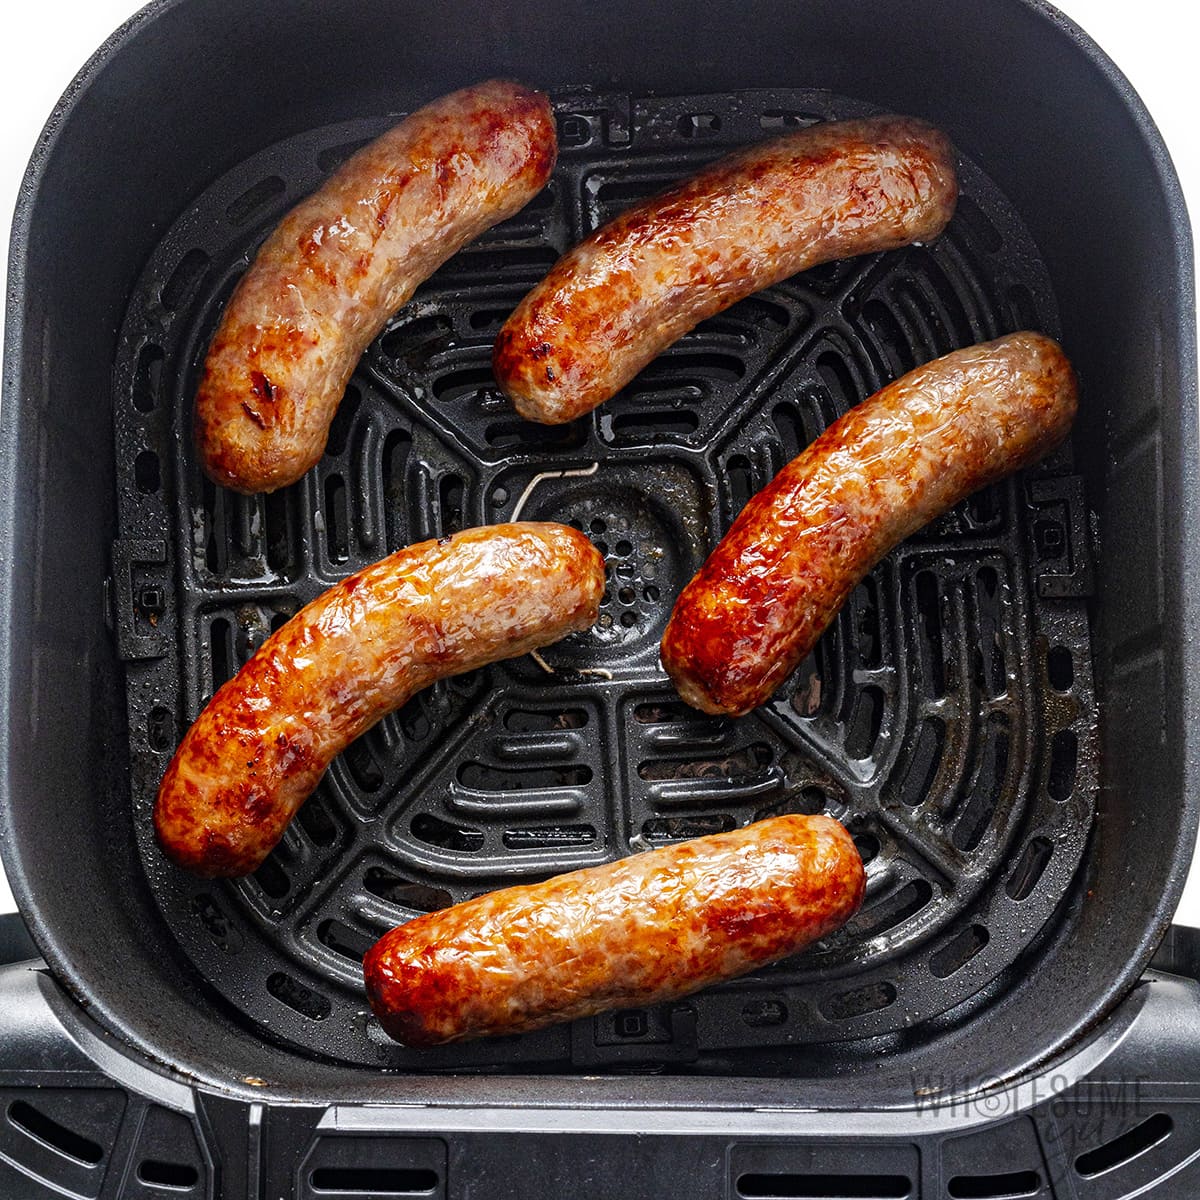 Cooked brats in the air fryer.